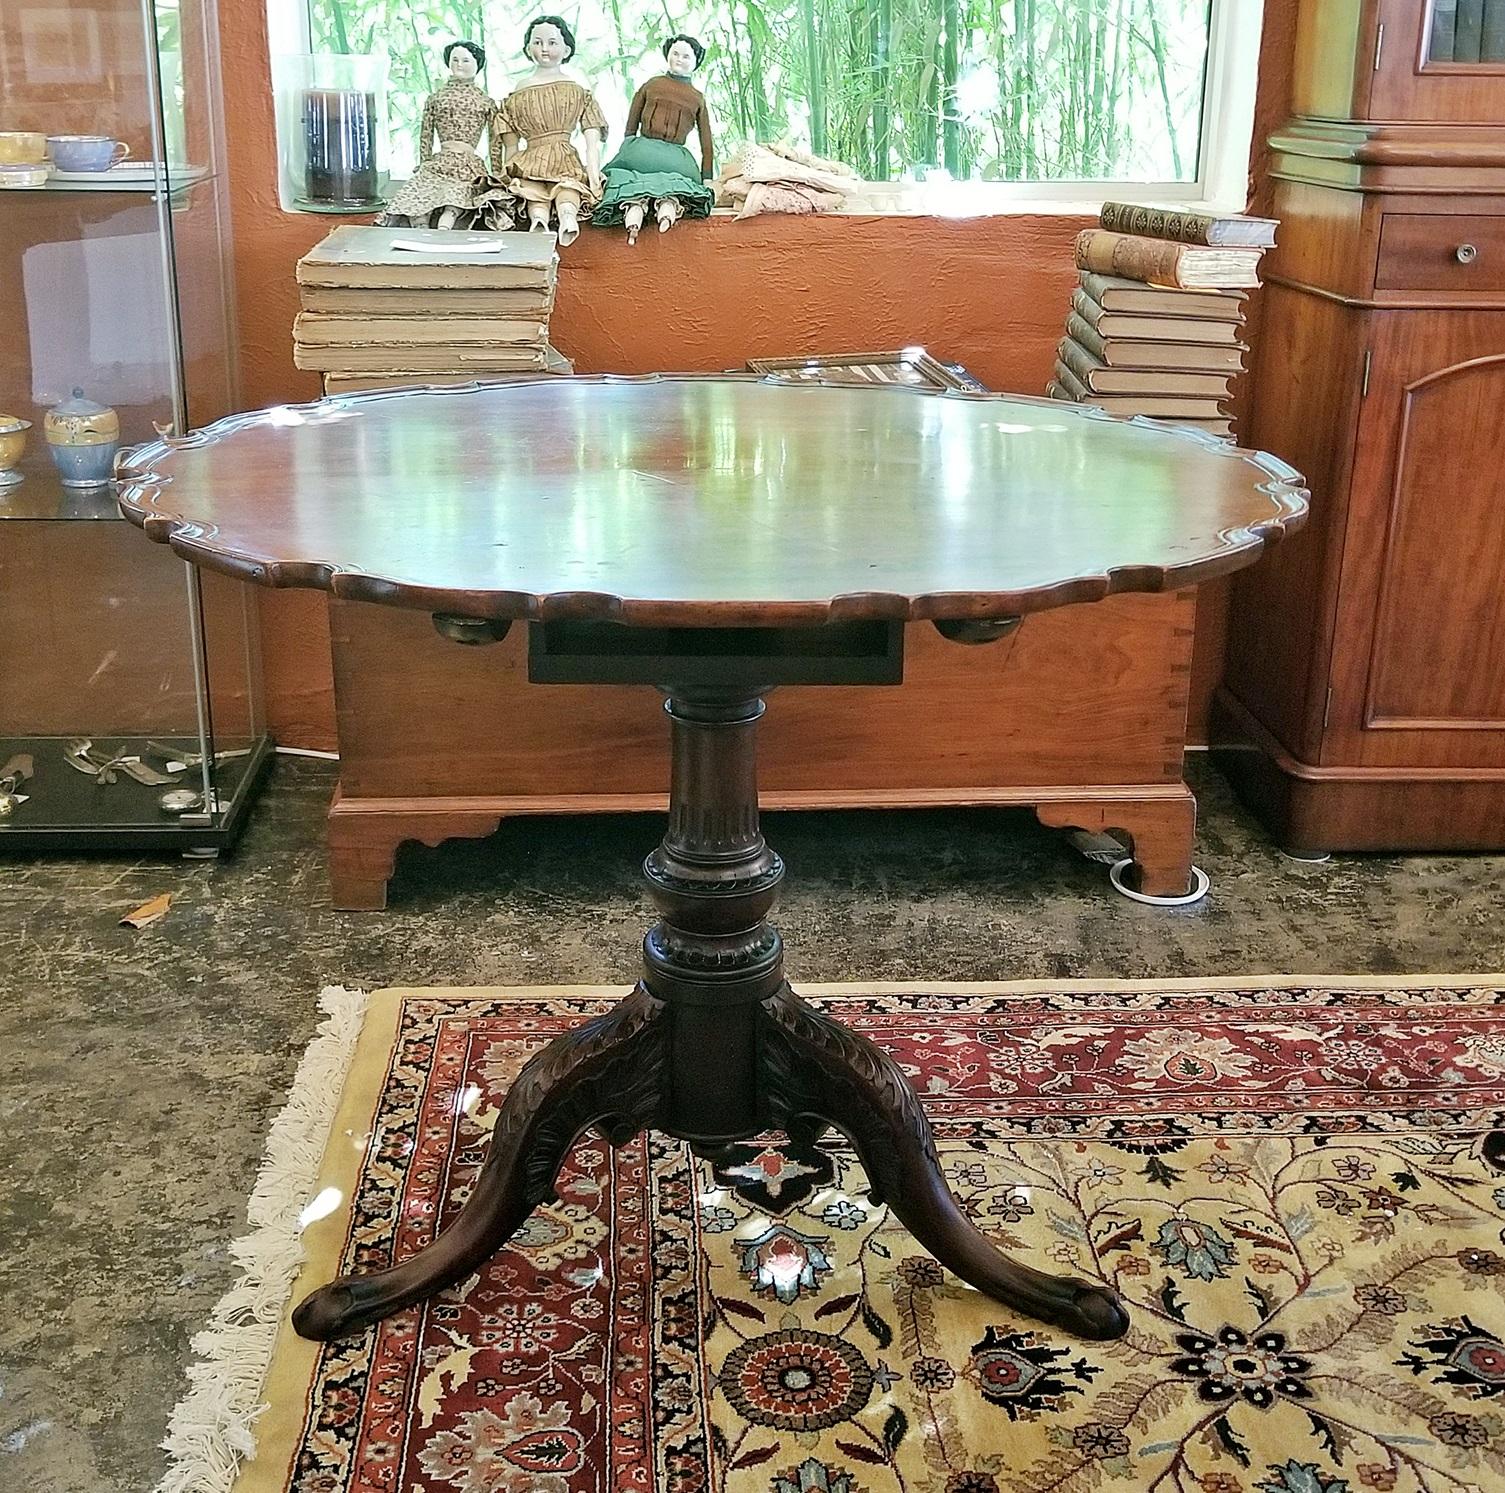 Presenting an absolutely gorgeous 18th century…..George III………English Mahogany Pie Crust tilt-top tea table.
The natural Patina on this table is simply lovely.
Made circa 1760-1780….beautifully hand carved.

The table top consists of one piece